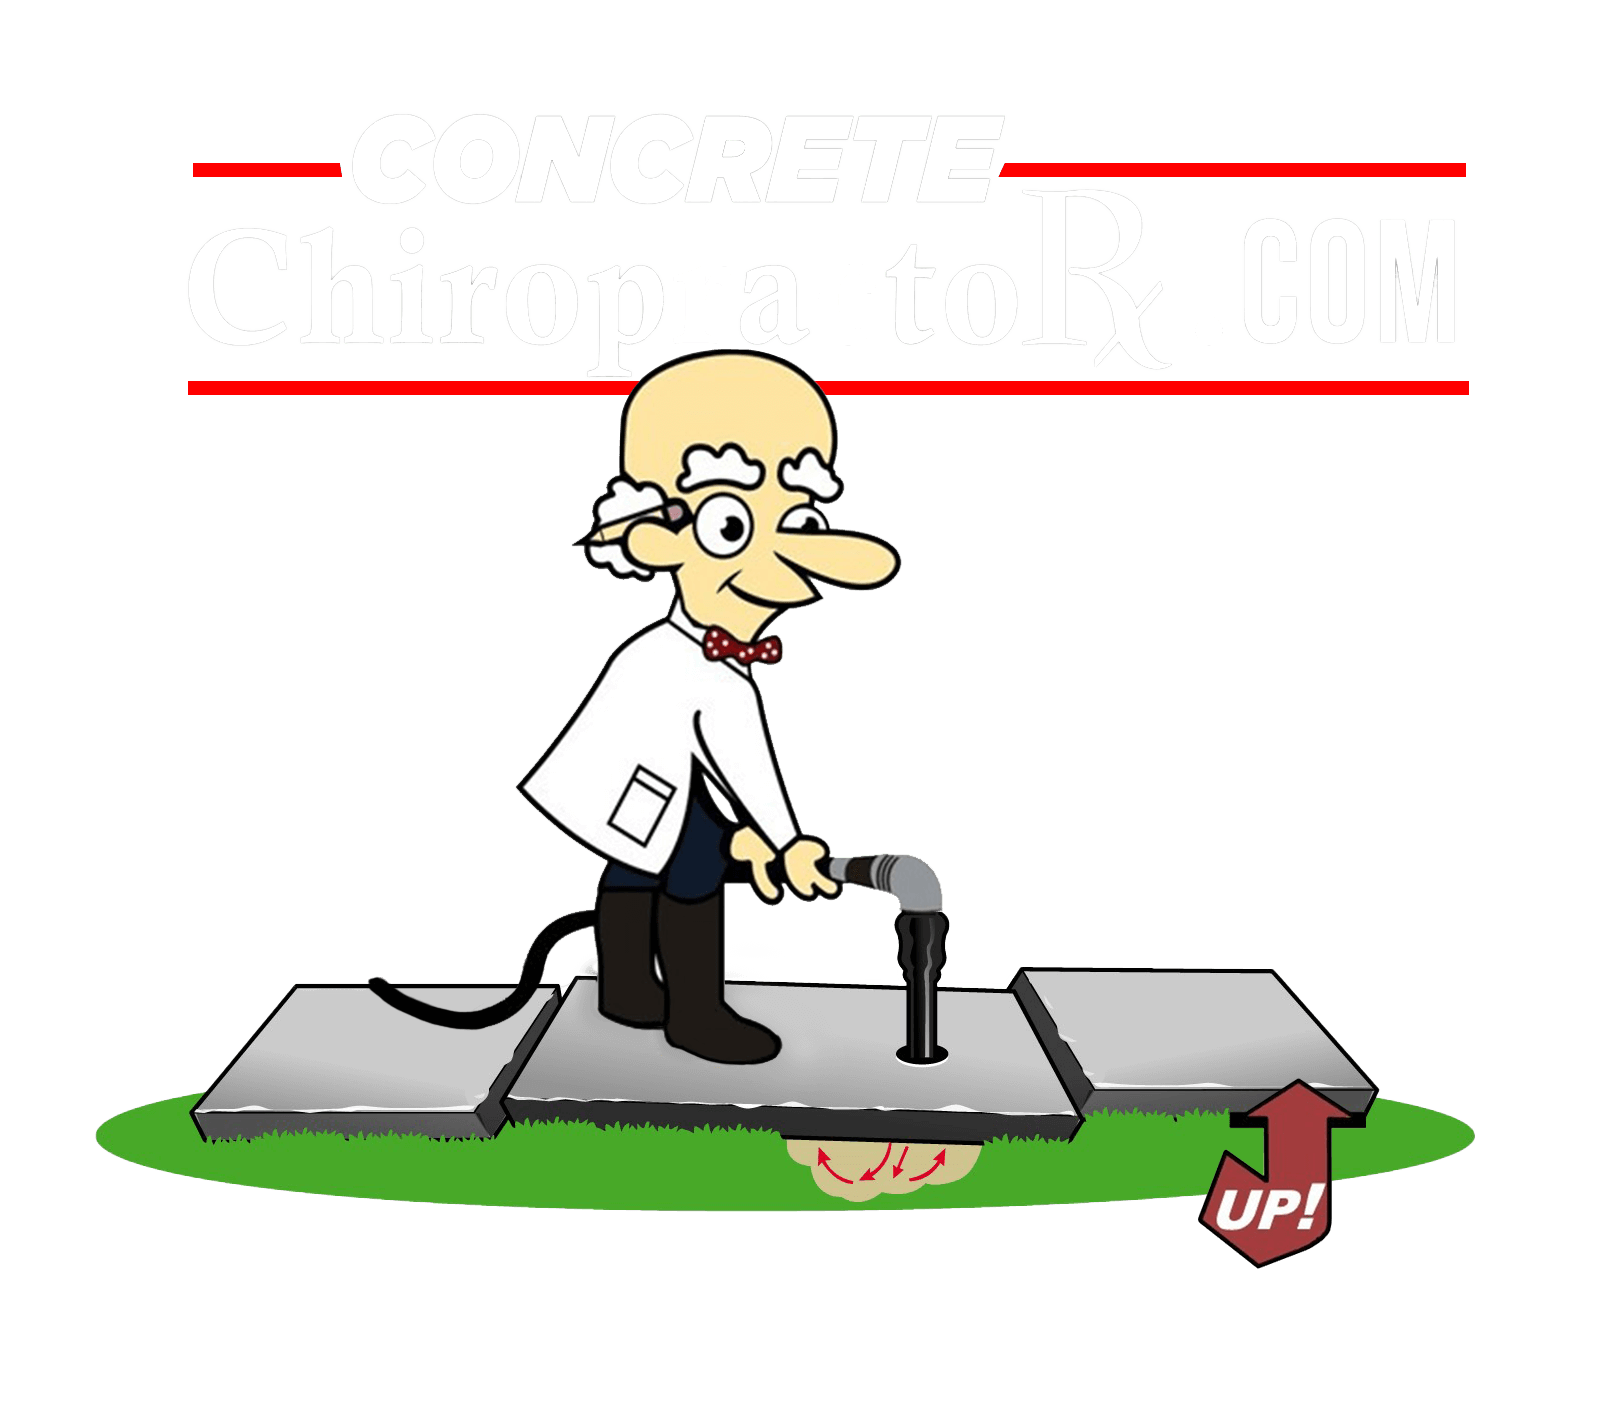 How to Make Your Concrete Business Successful, Concrete Chiropractor